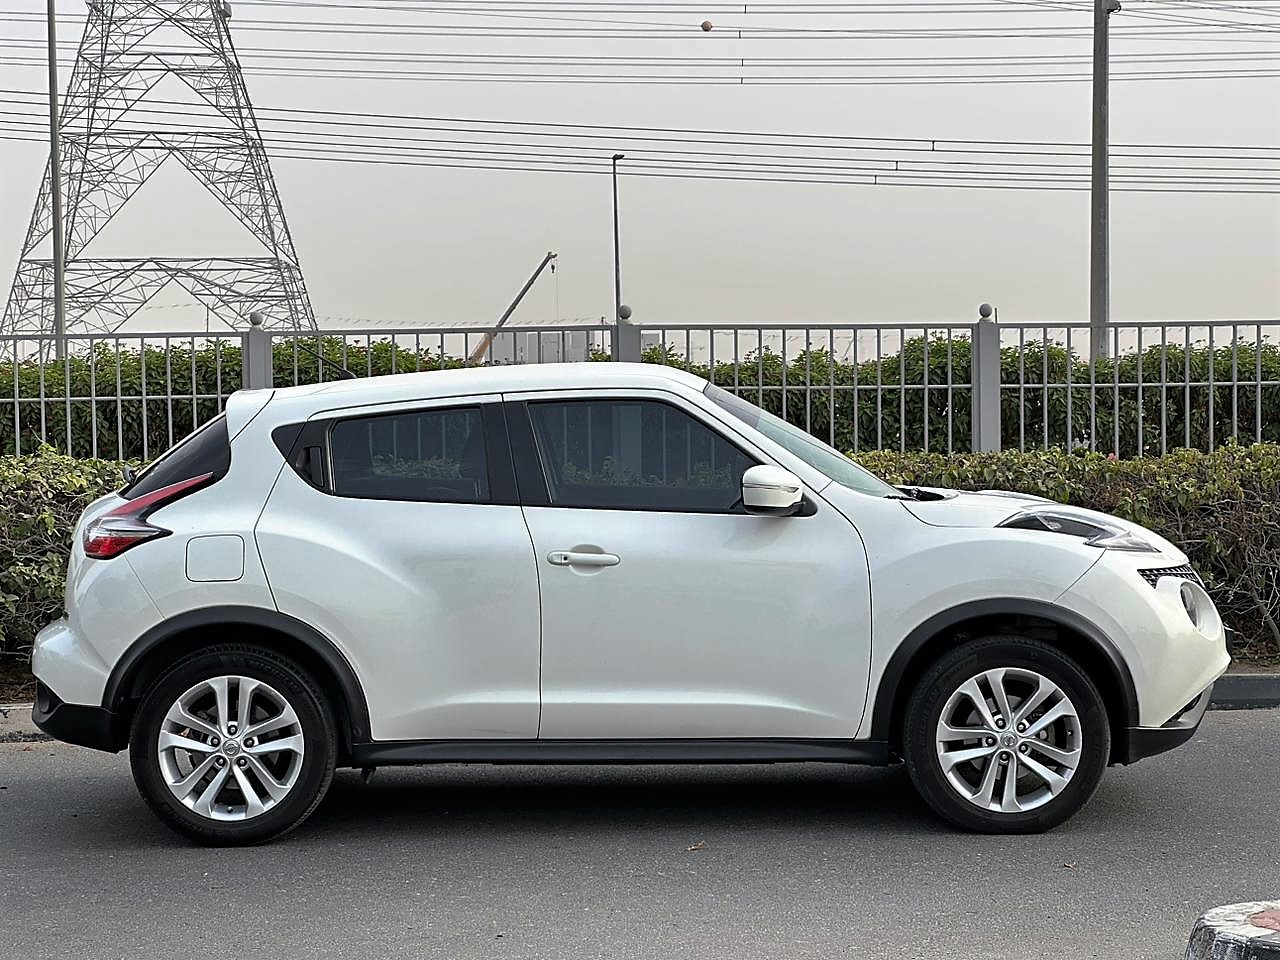 667-/ Aed MONTHLY 2015 NISSAN JUKE 1.6L S, | GCC Specifications |